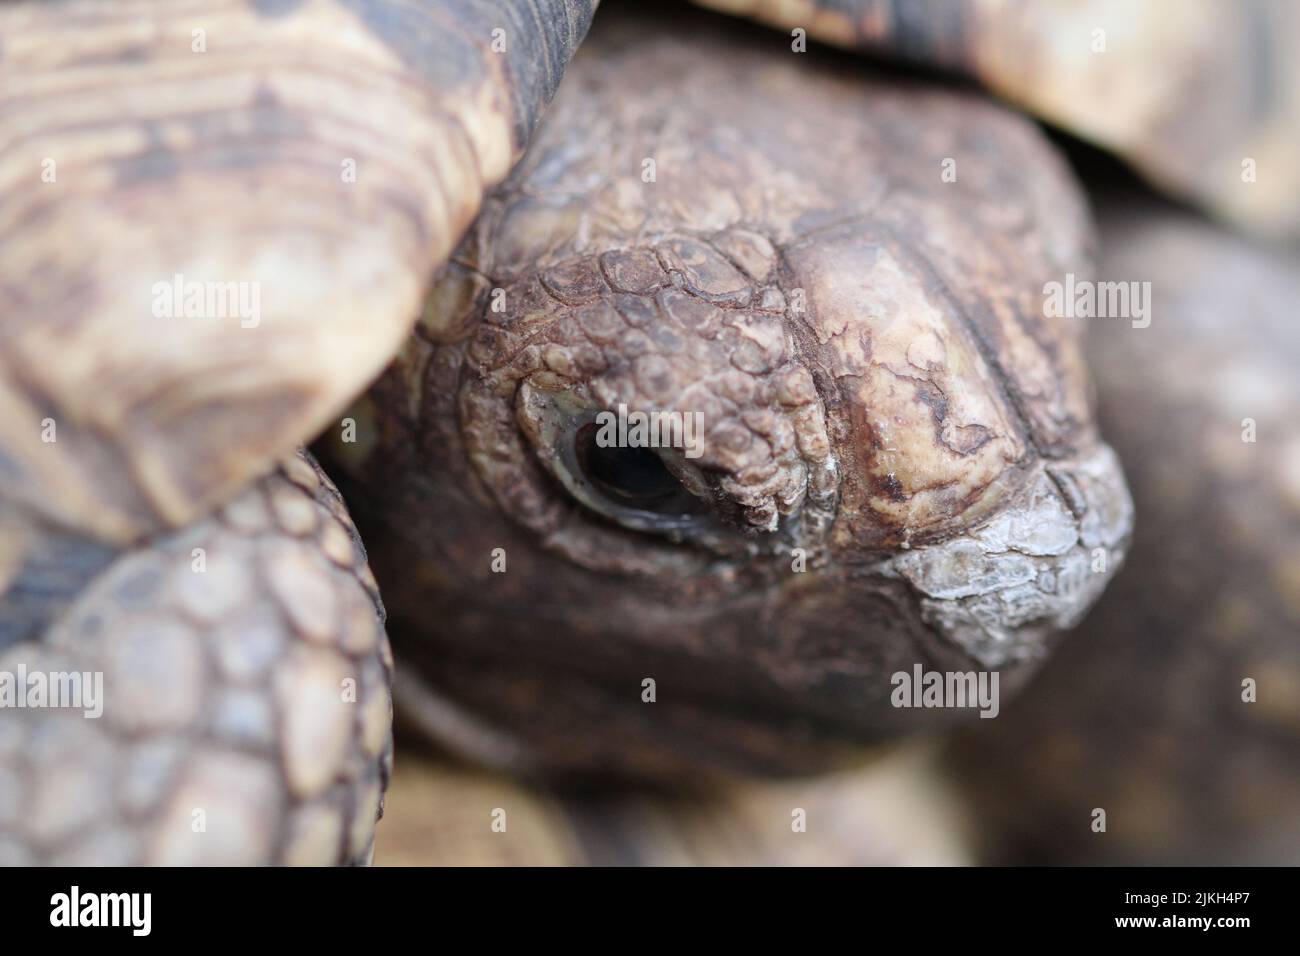 A closeup shot of a beautiful turtle on the blurry background Stock Photo